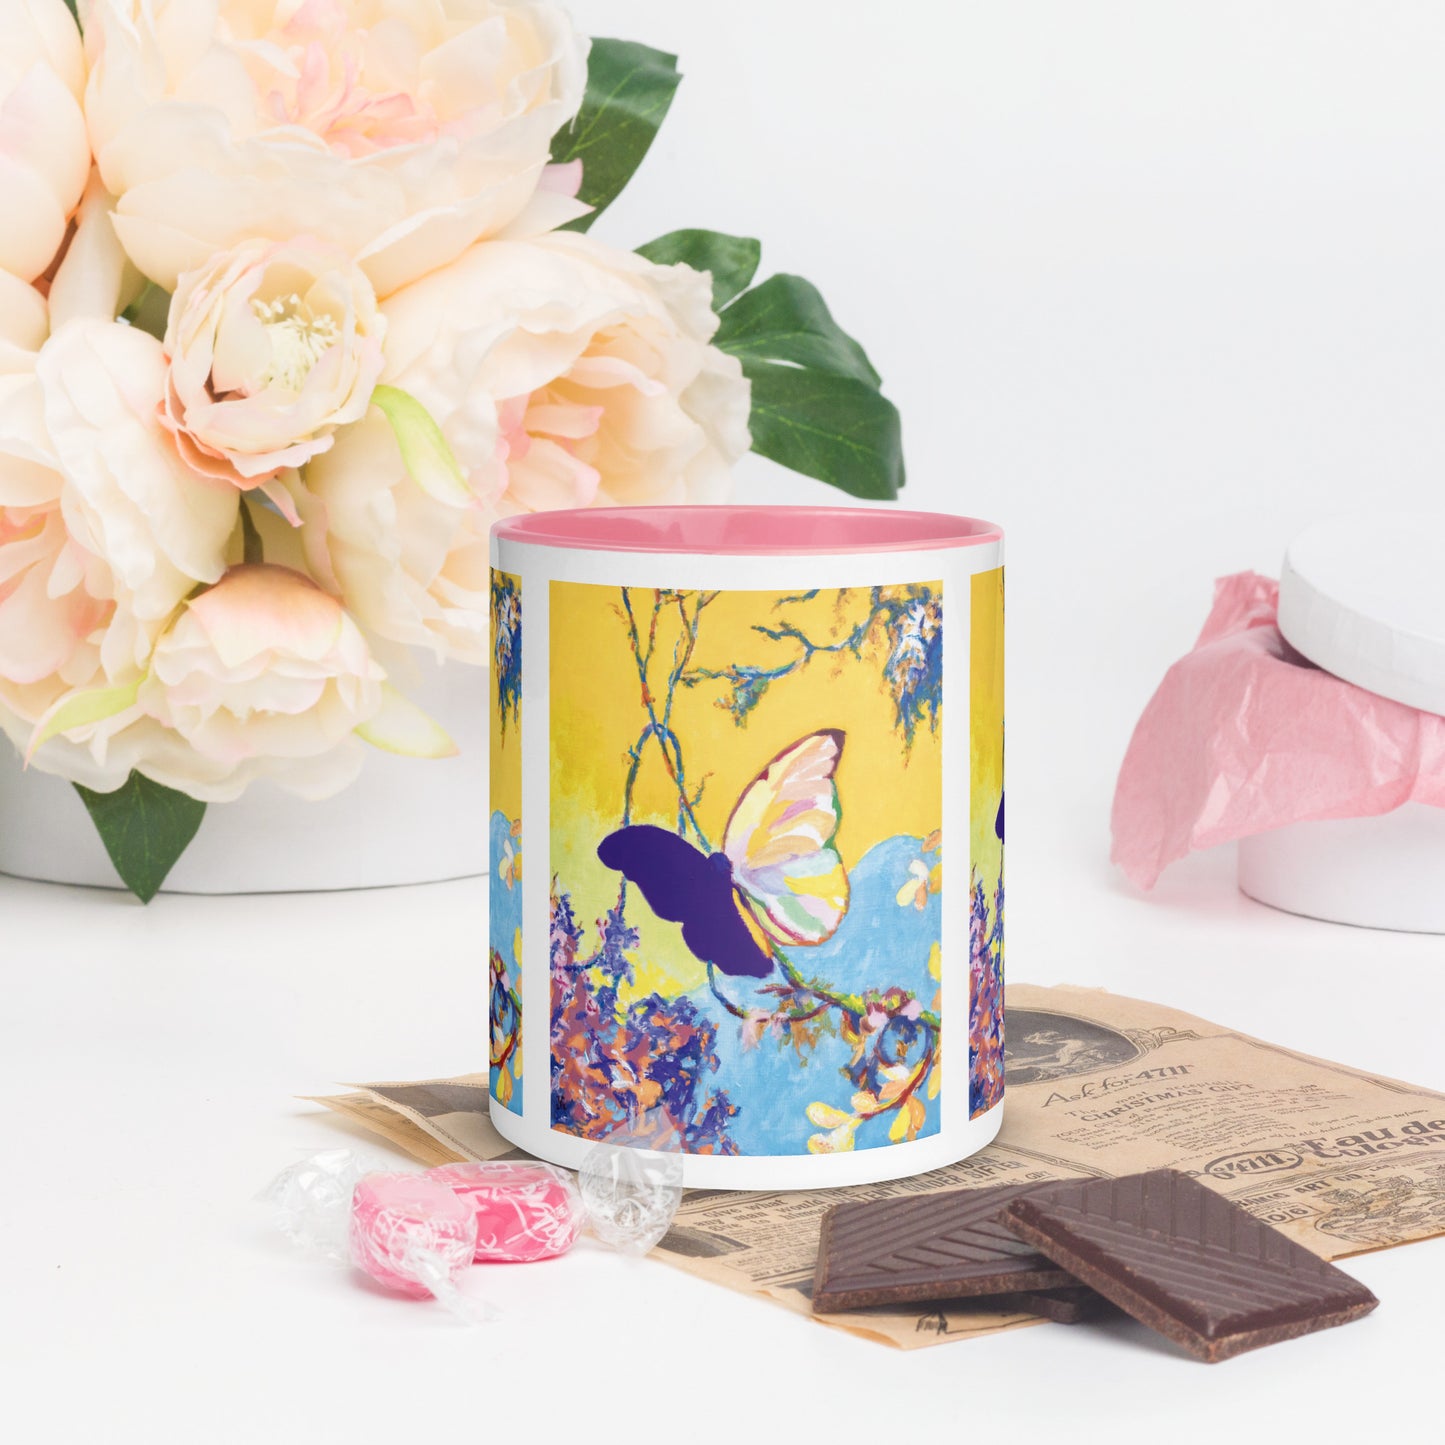 Dawn - Butterfly Mug with Color Inside